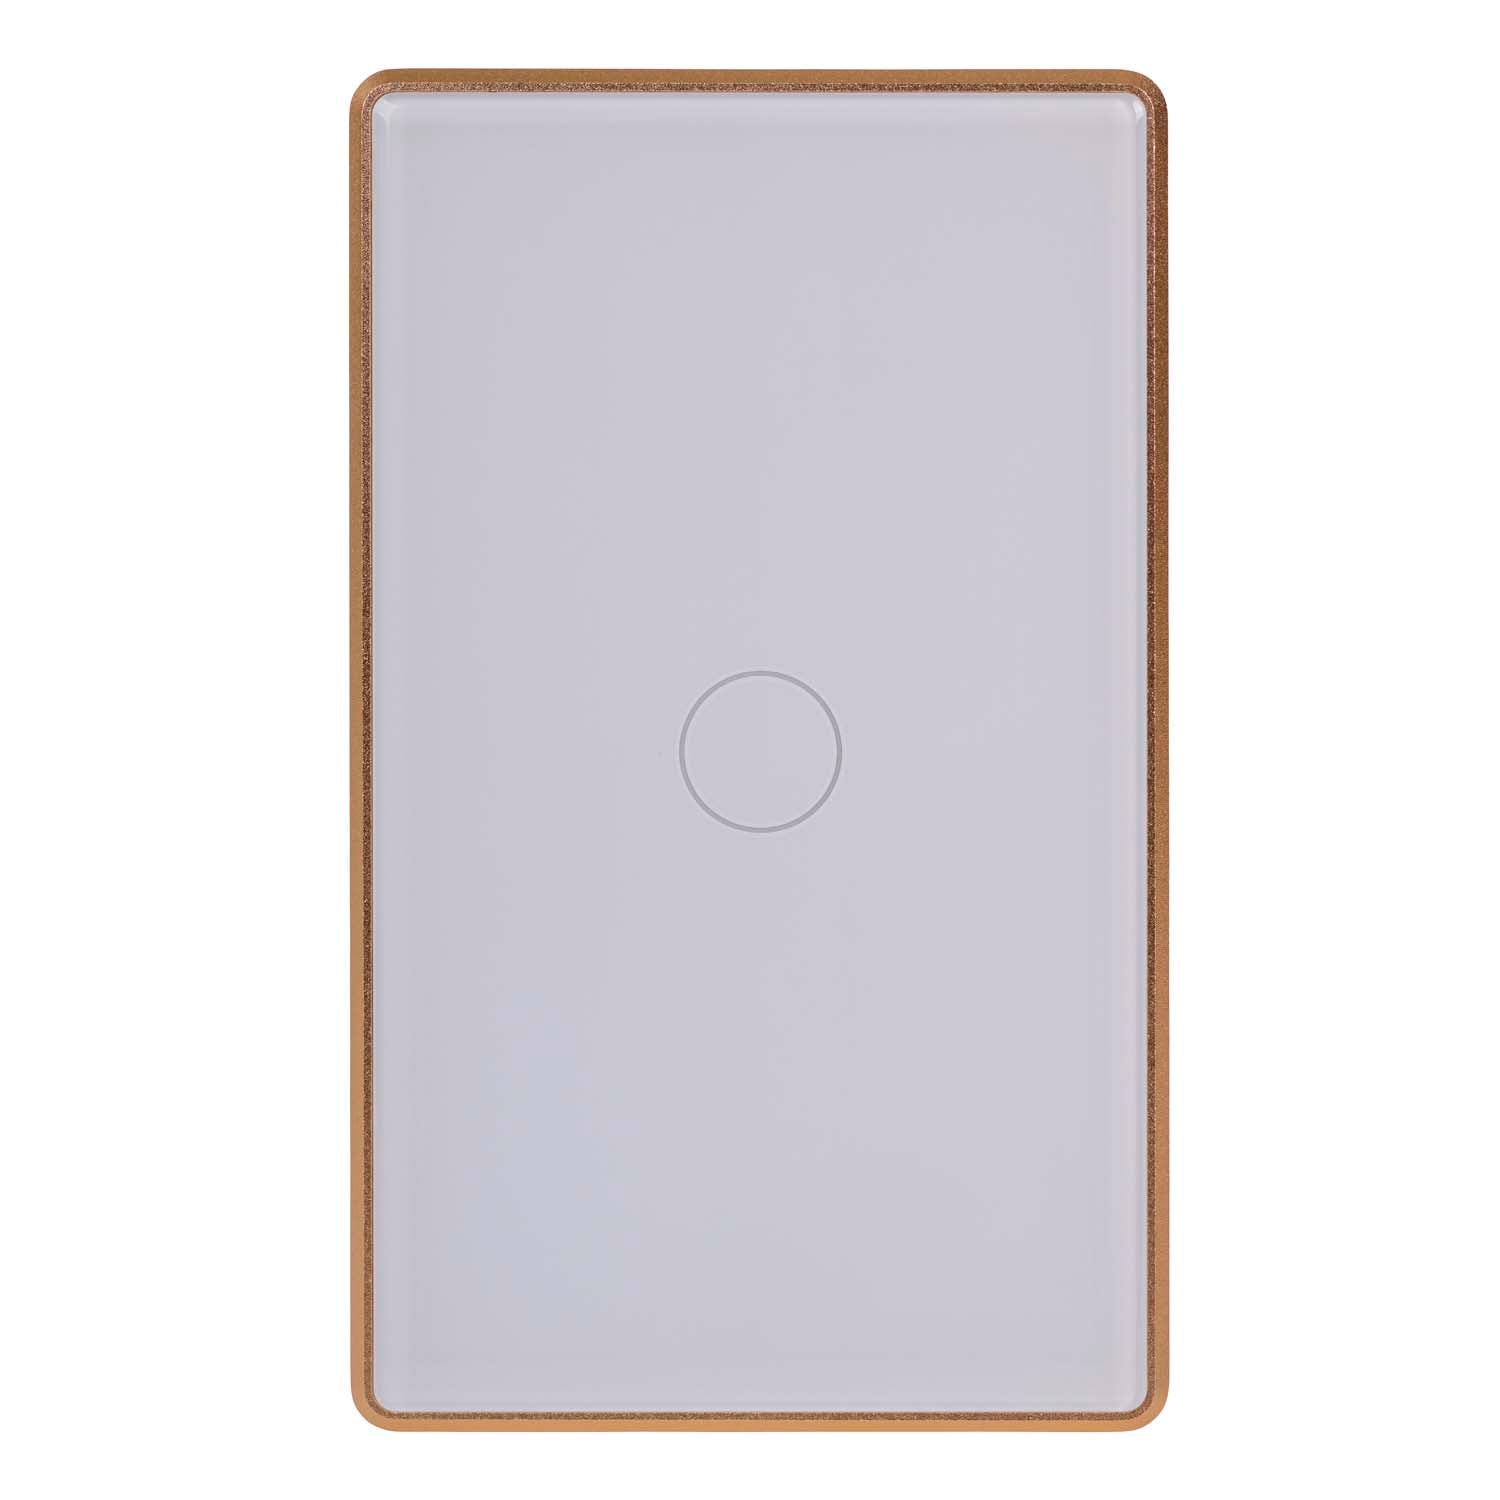 HV9120-1 - Wifi Single Gang White with Gold Trim Wall Switch